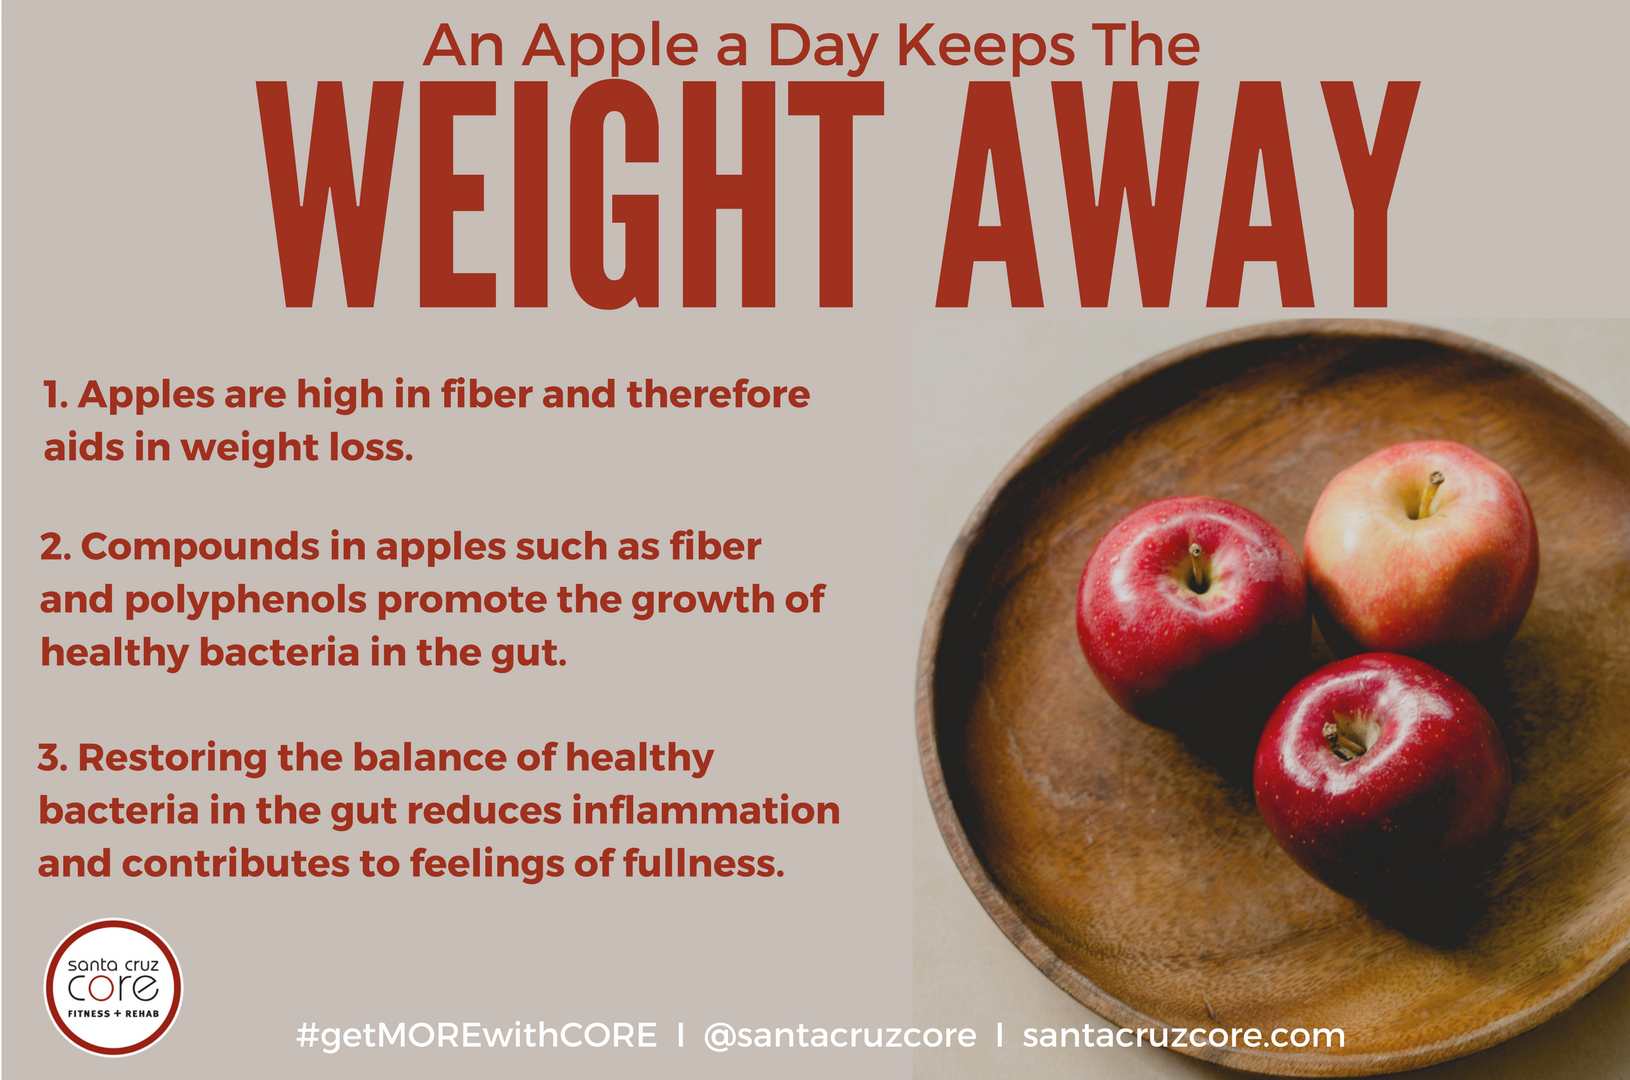 are apples good for weight loss?